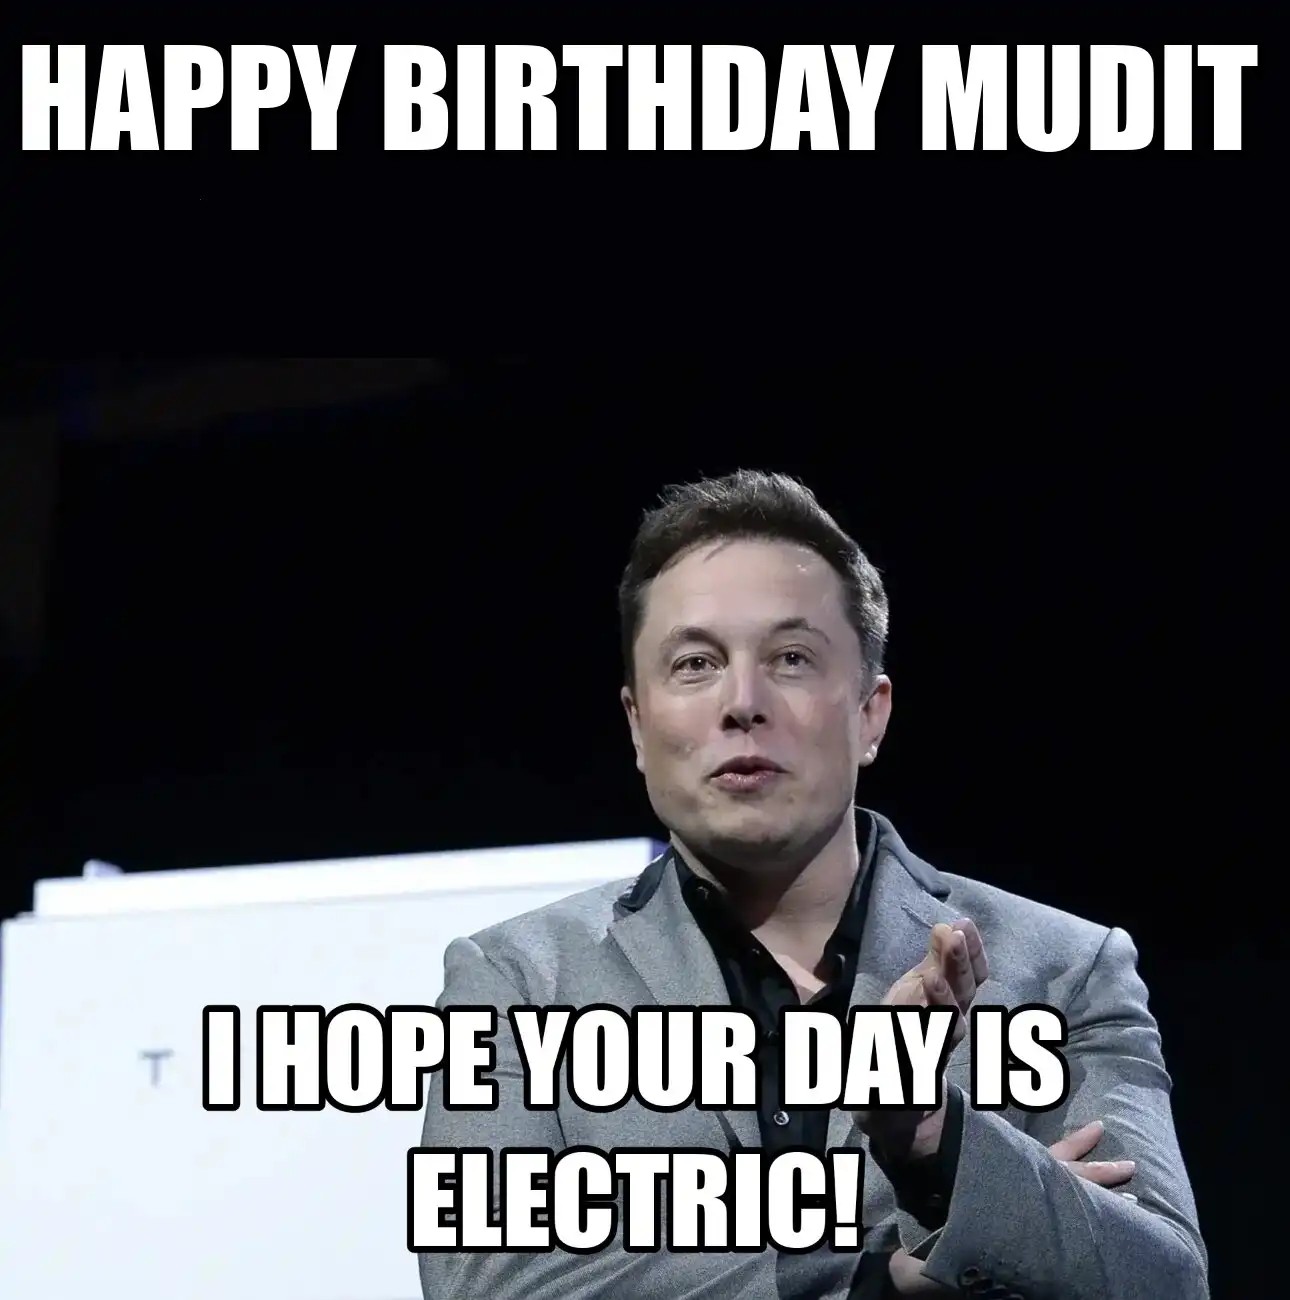 Happy Birthday Mudit I Hope Your Day Is Electric Meme